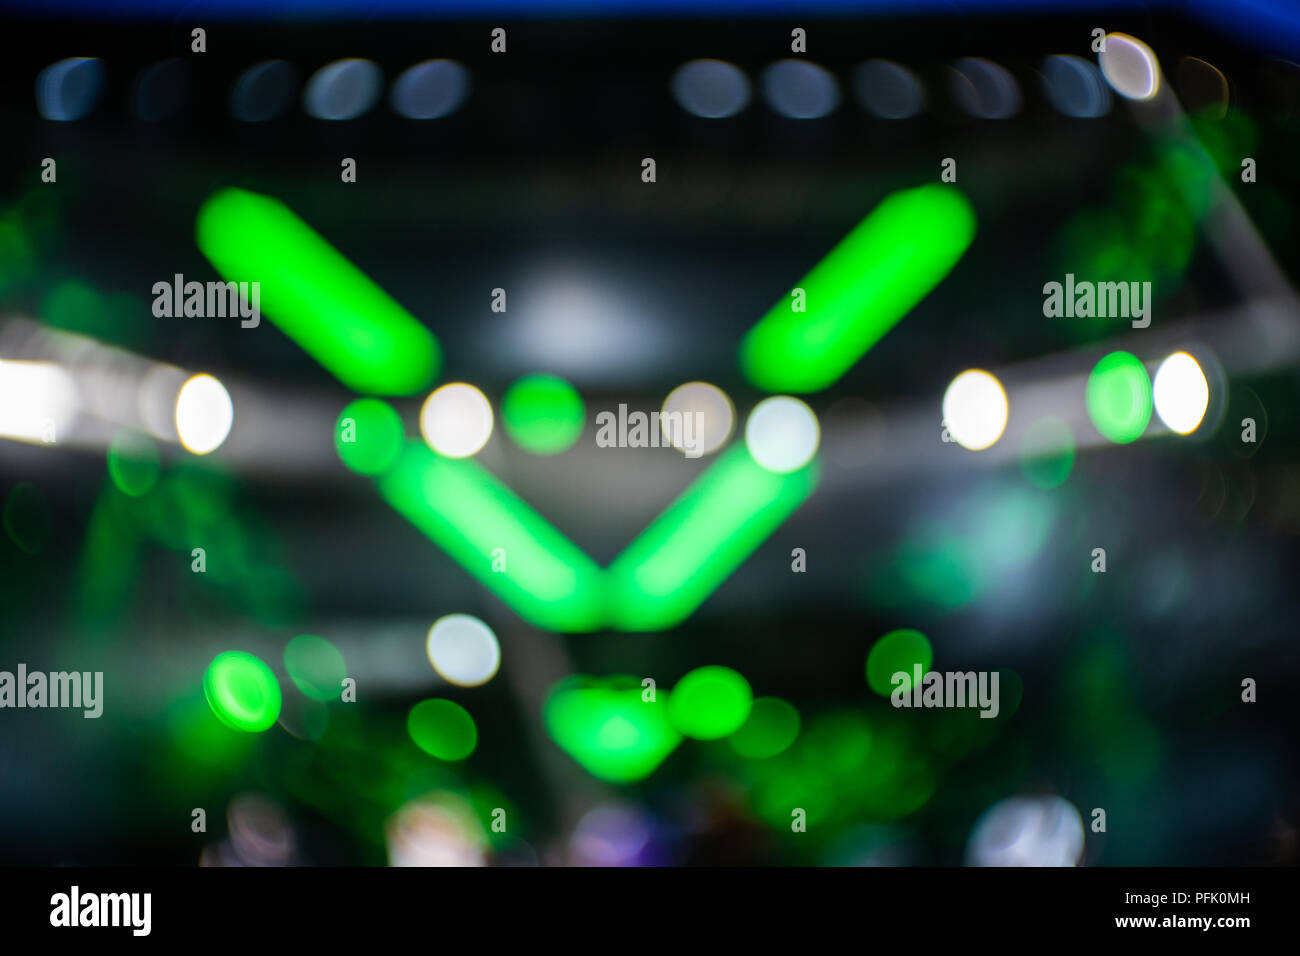 Abstraction with blurry green light circles Stock Photo